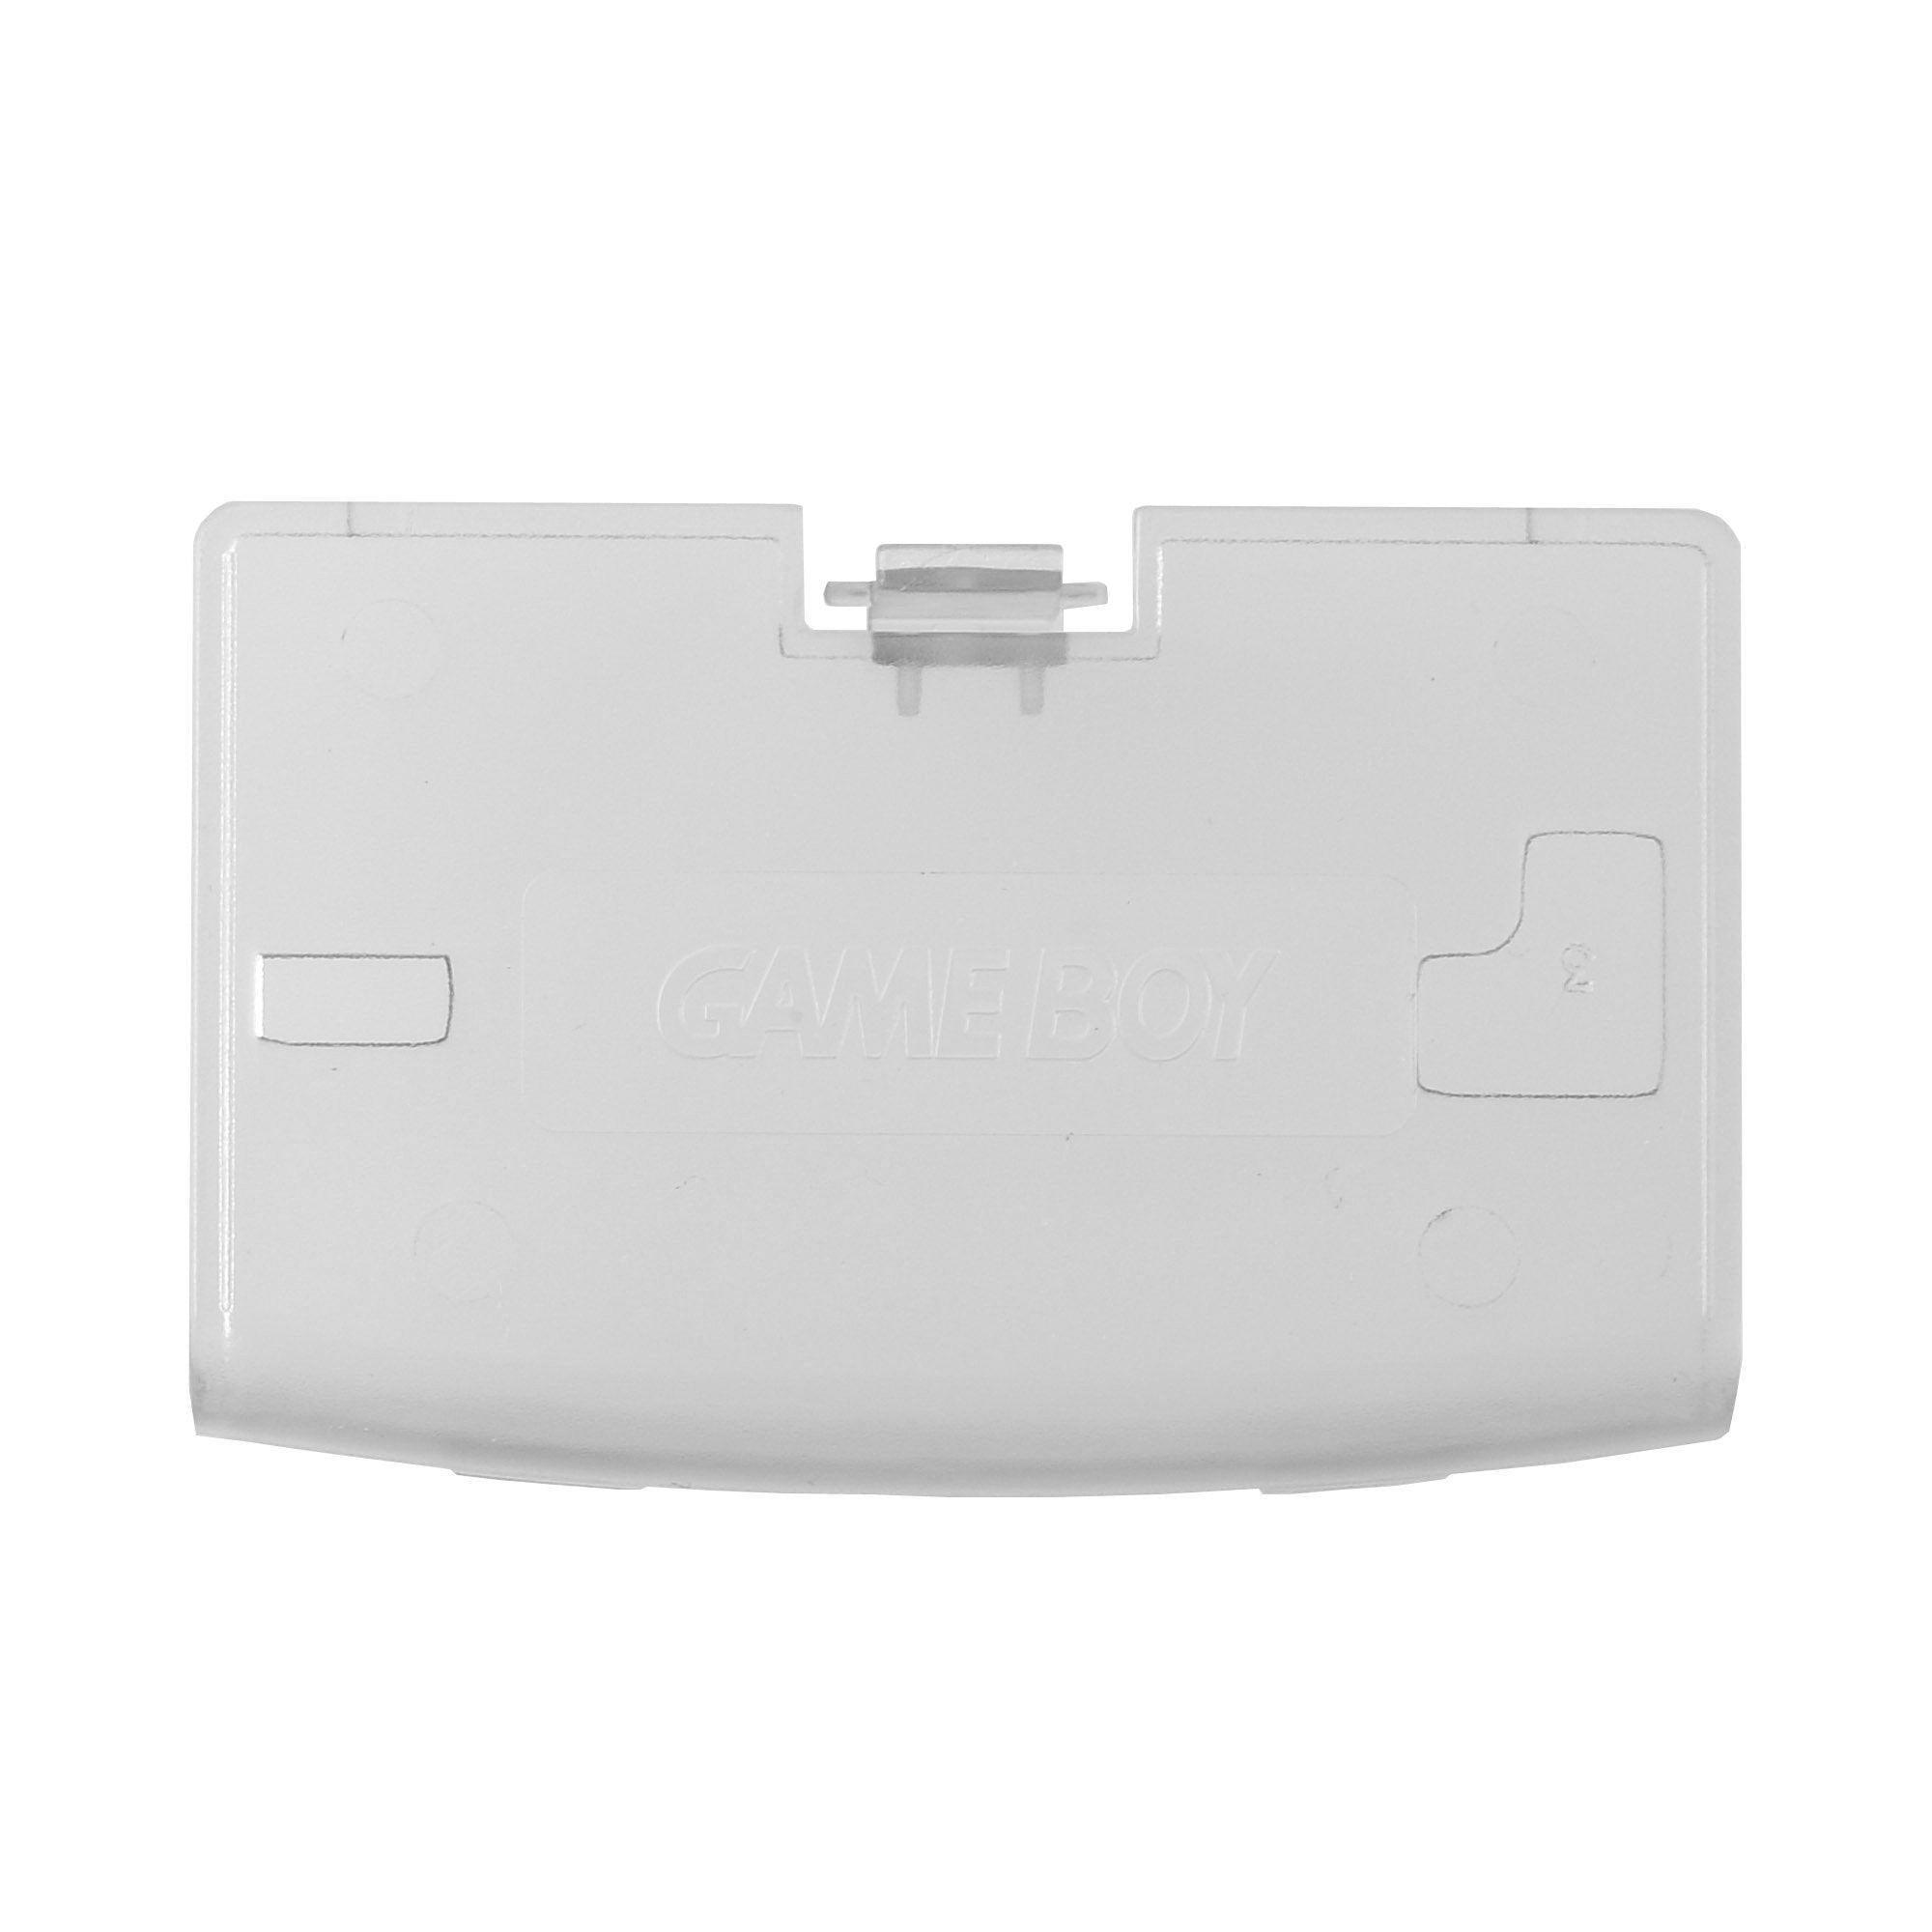 Batterideksel for GameBoy Advance (GBA) - RetroGaming.no